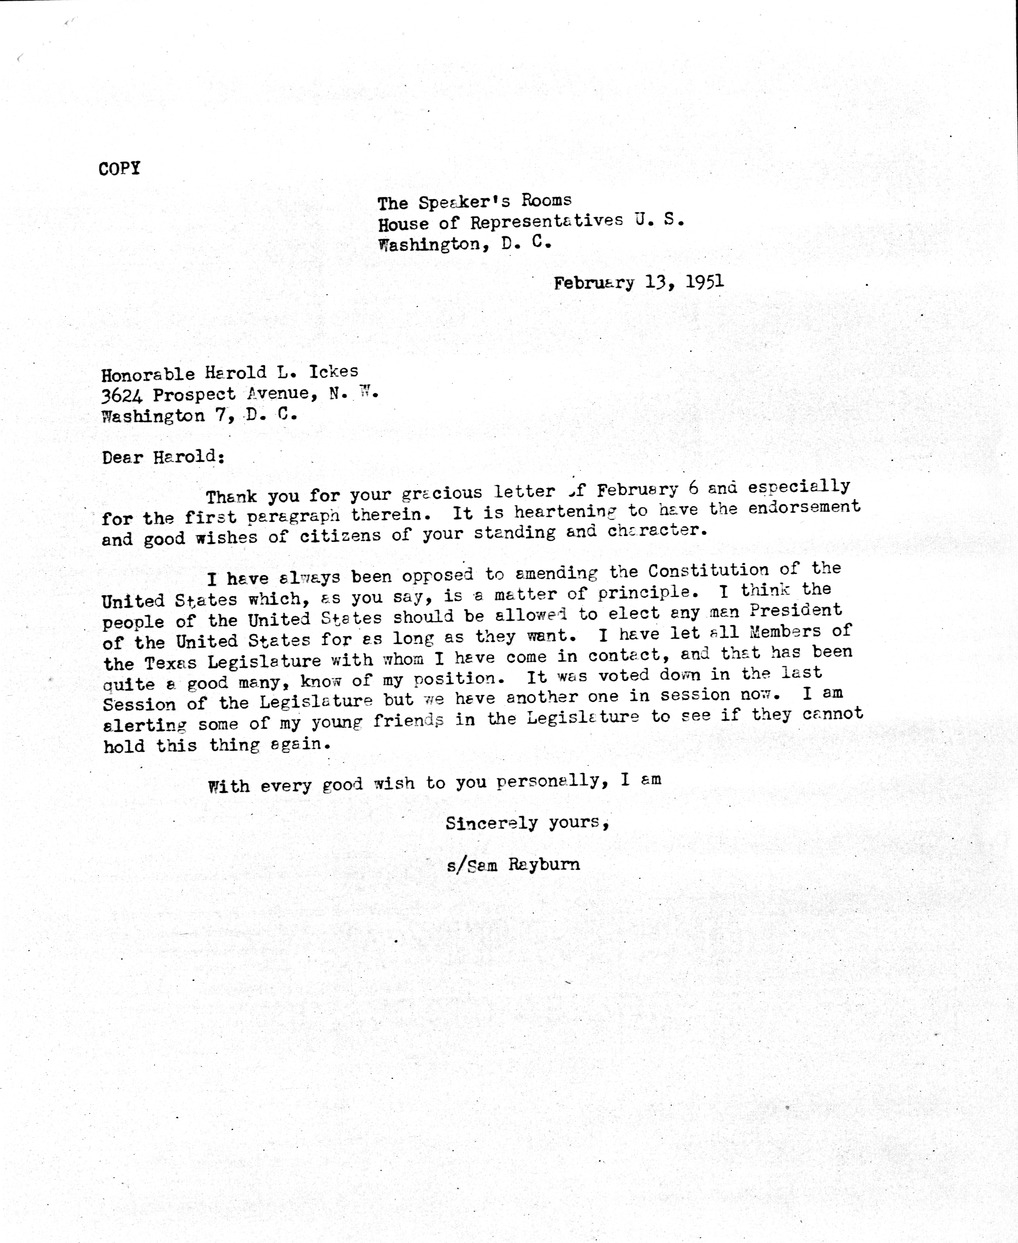 Letter from Harold Ickes to Daniel F. Clancy, with Attachment